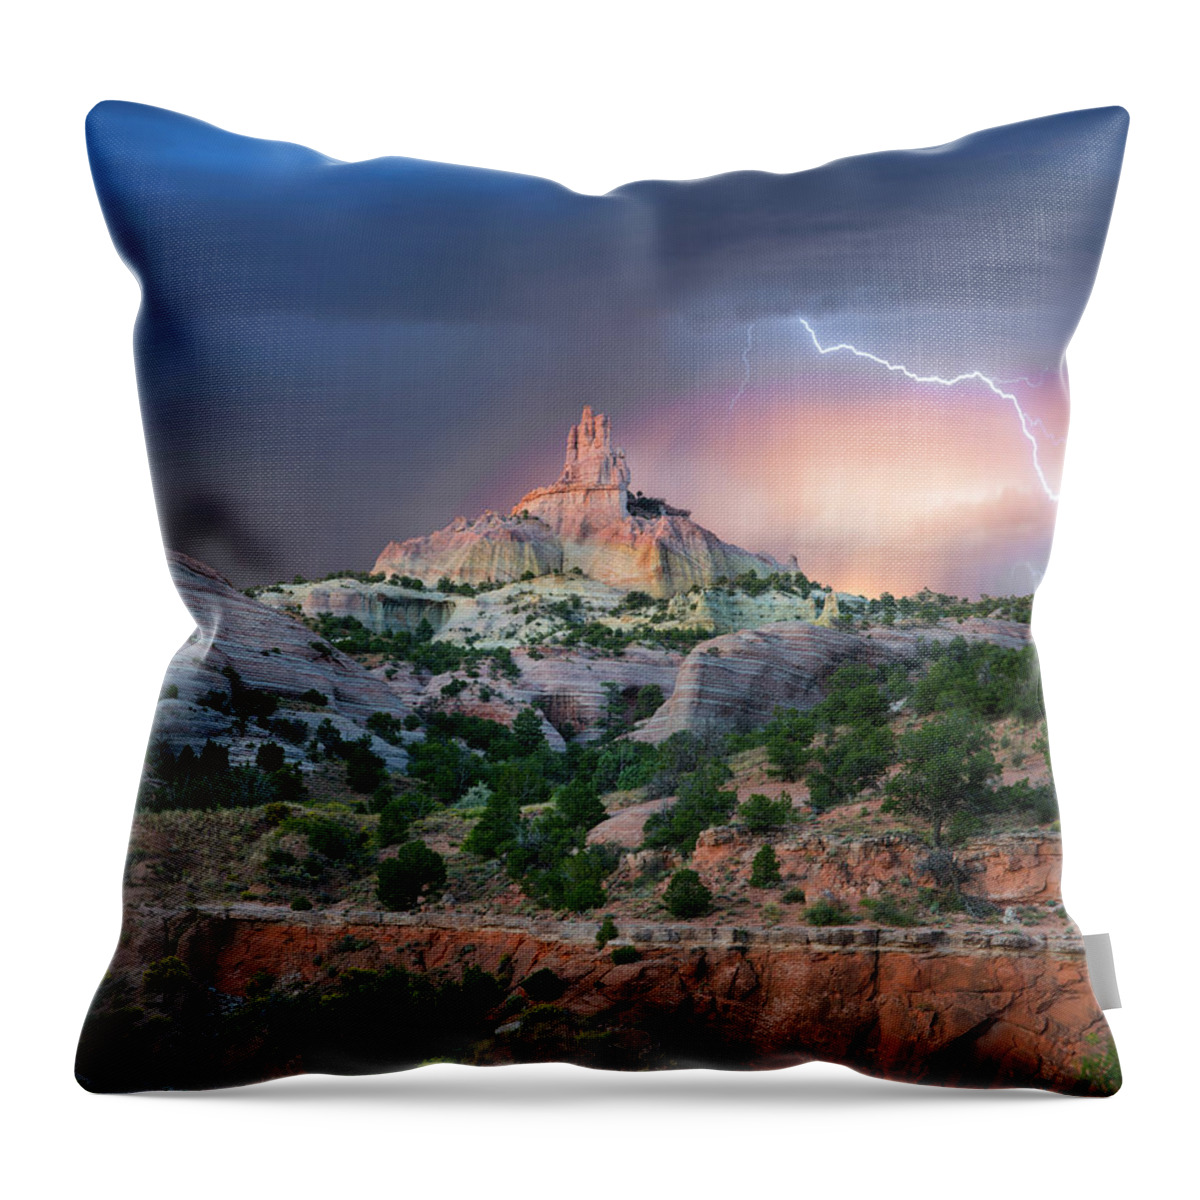 00563967 Throw Pillow featuring the photograph Lightning At Church Rock, Red Rock State Park, New Mexico by Tim Fitzharris